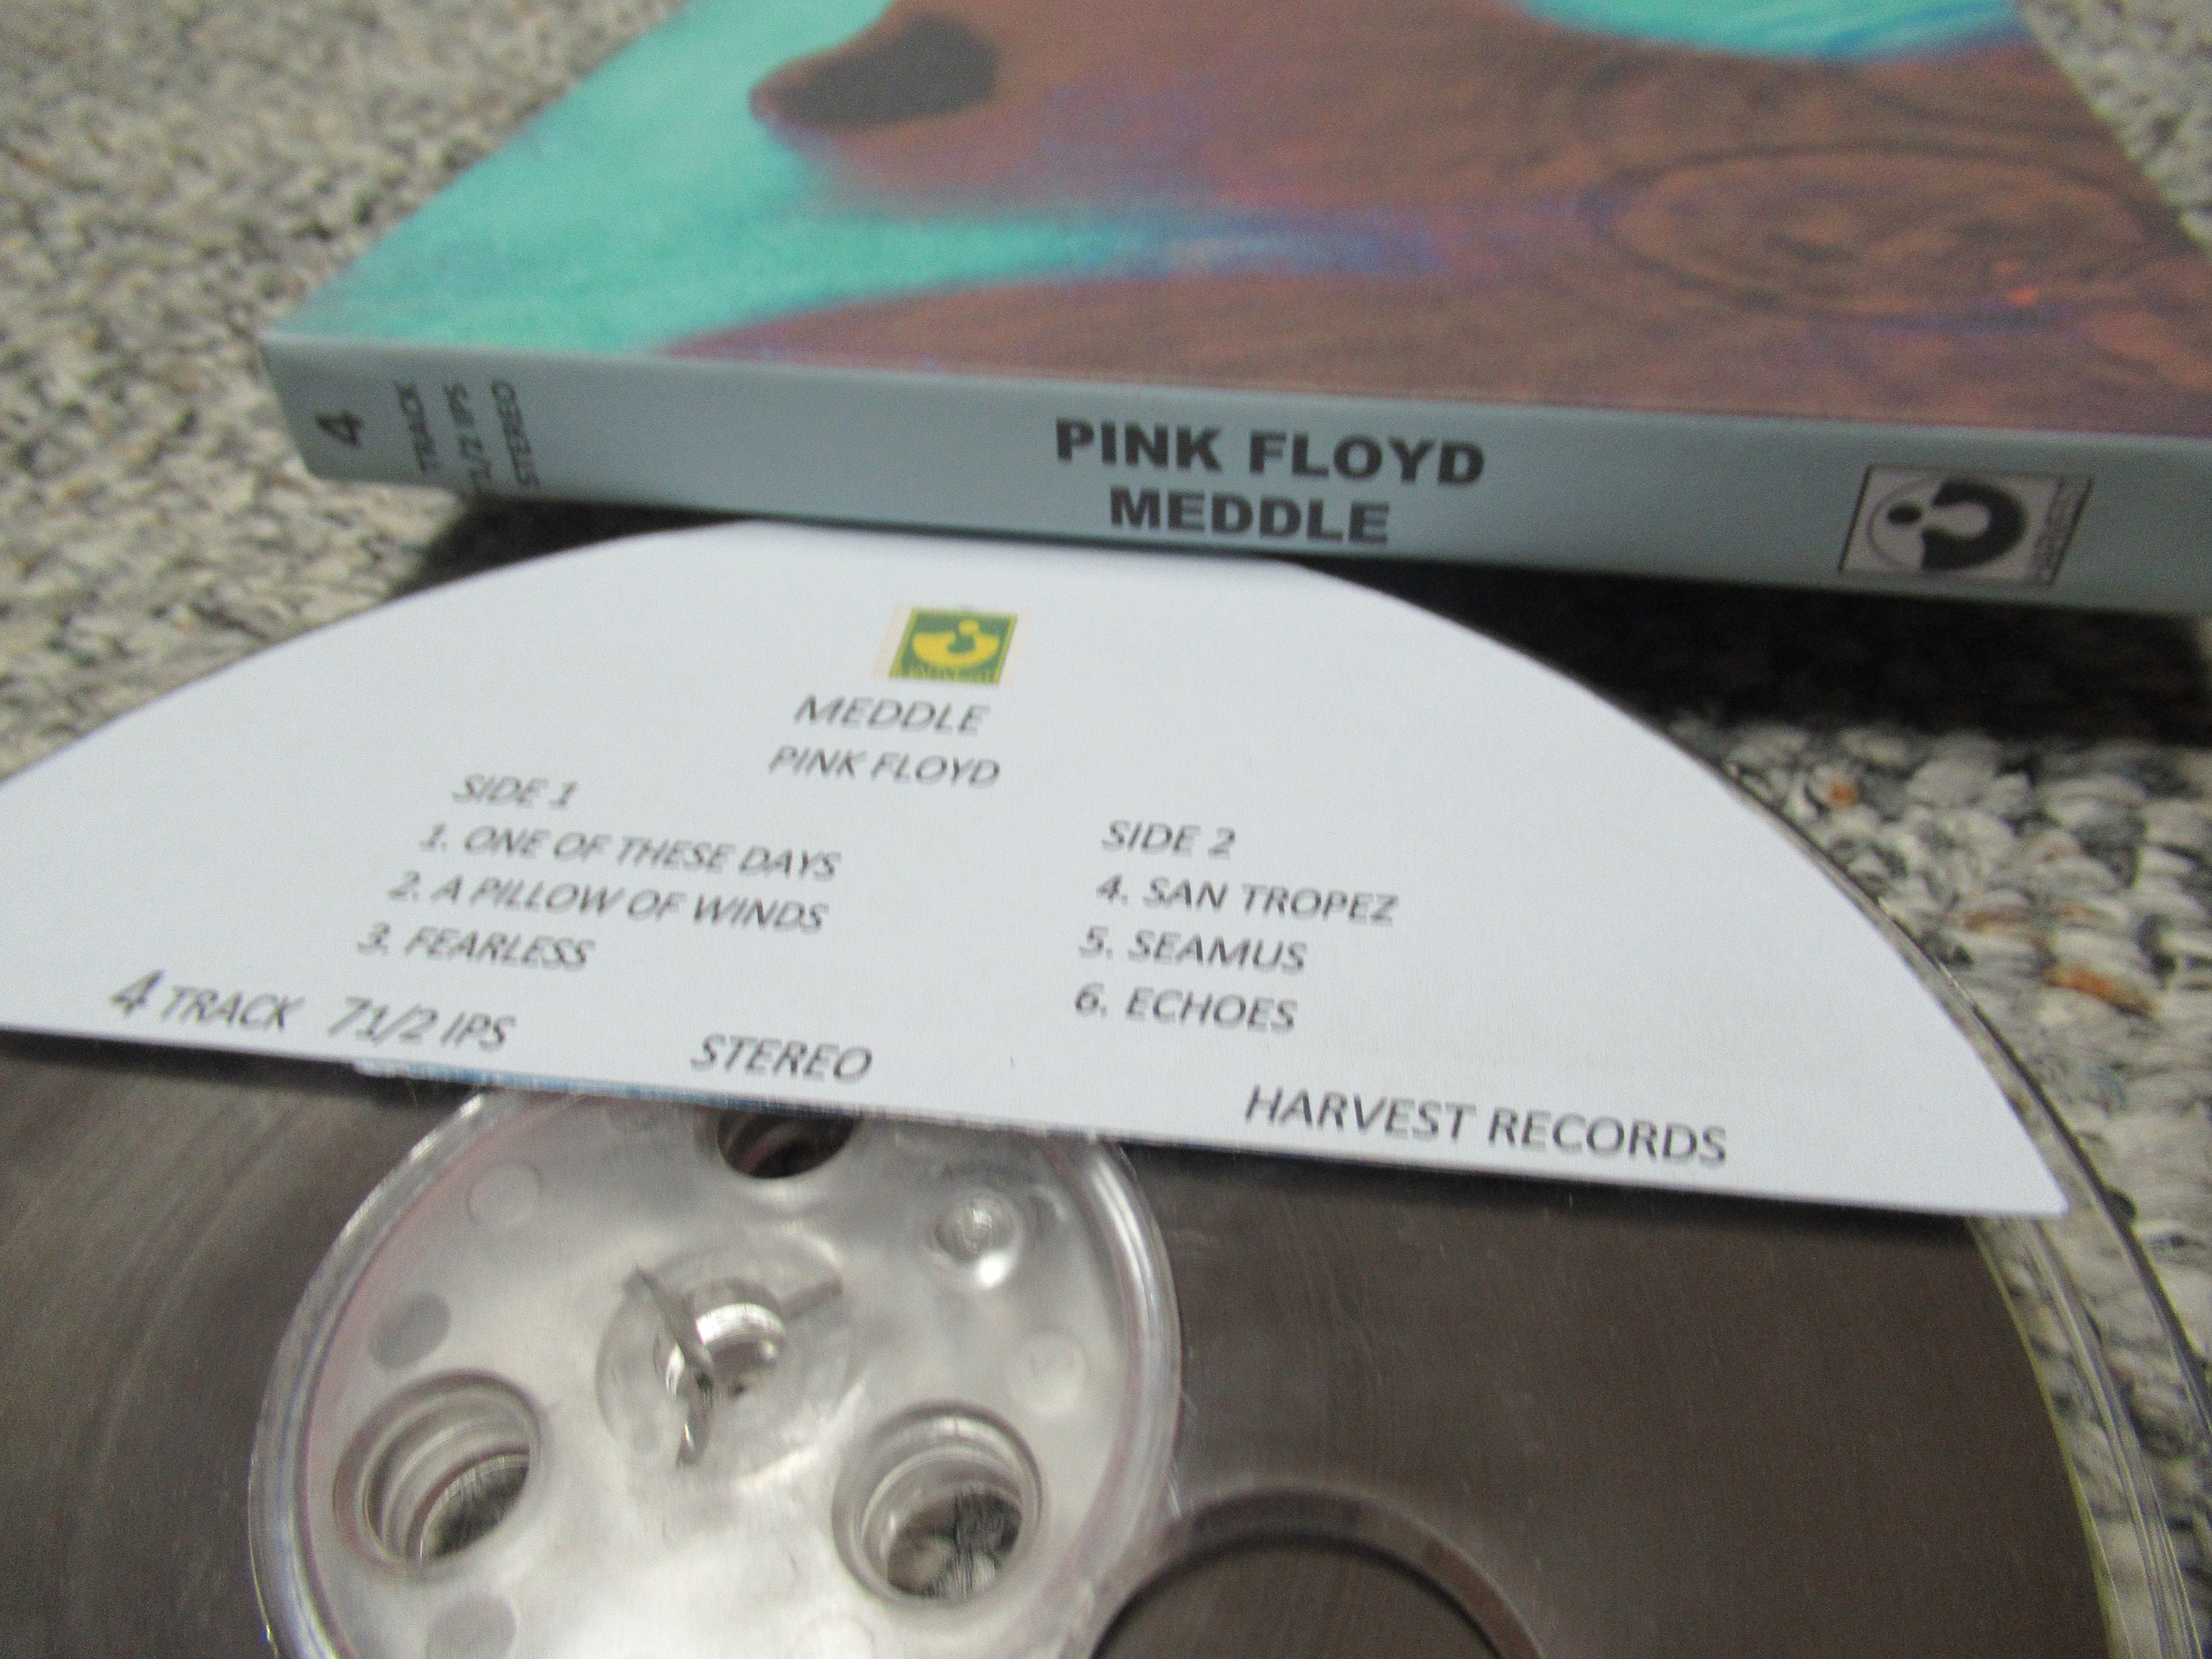  PINK FLOYD ANIMALS 15ips 2 TRACK Reel To Reel Record